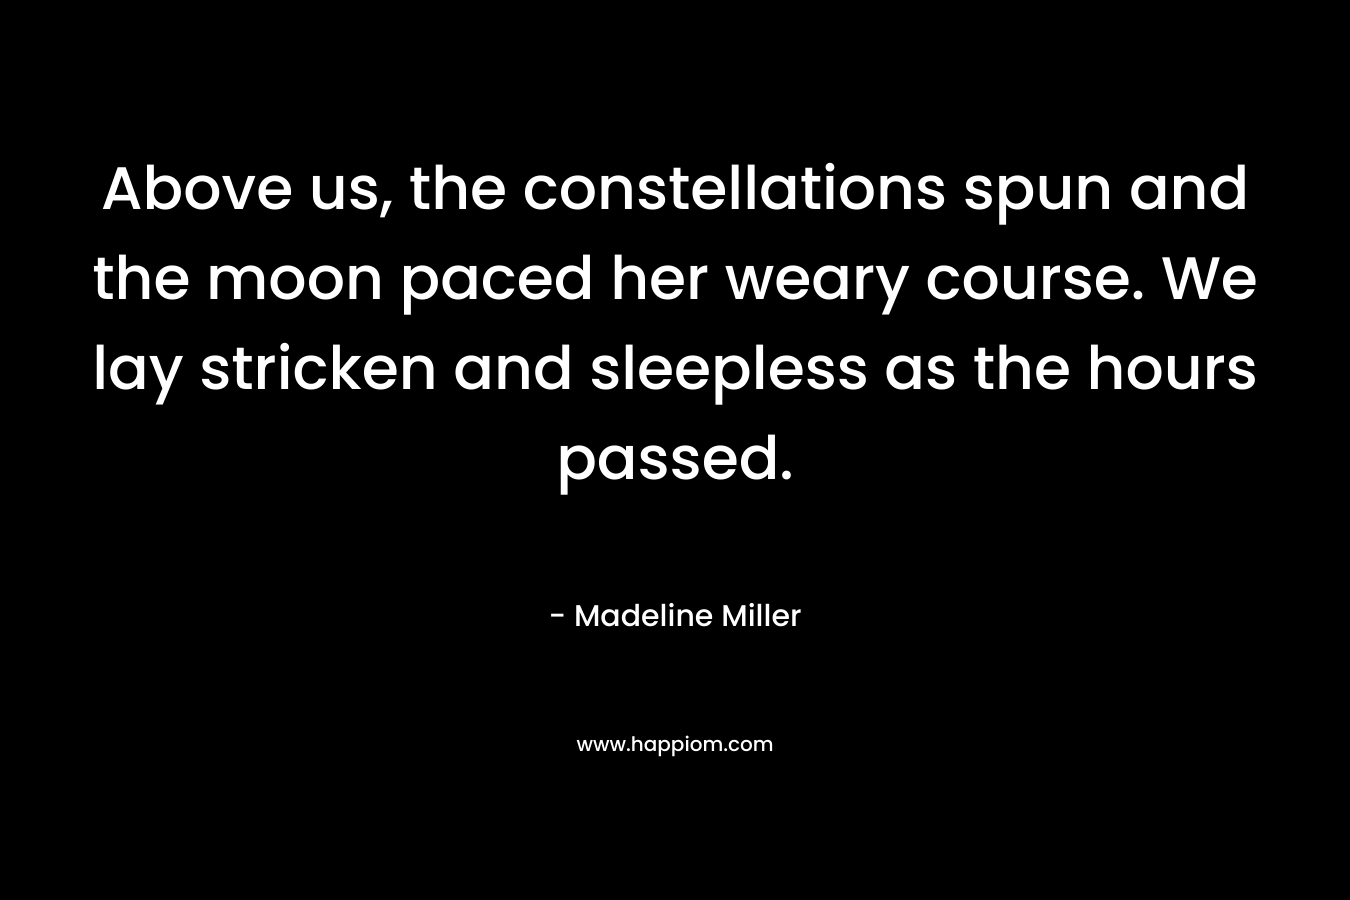 Above us, the constellations spun and the moon paced her weary course. We lay stricken and sleepless as the hours passed. – Madeline Miller